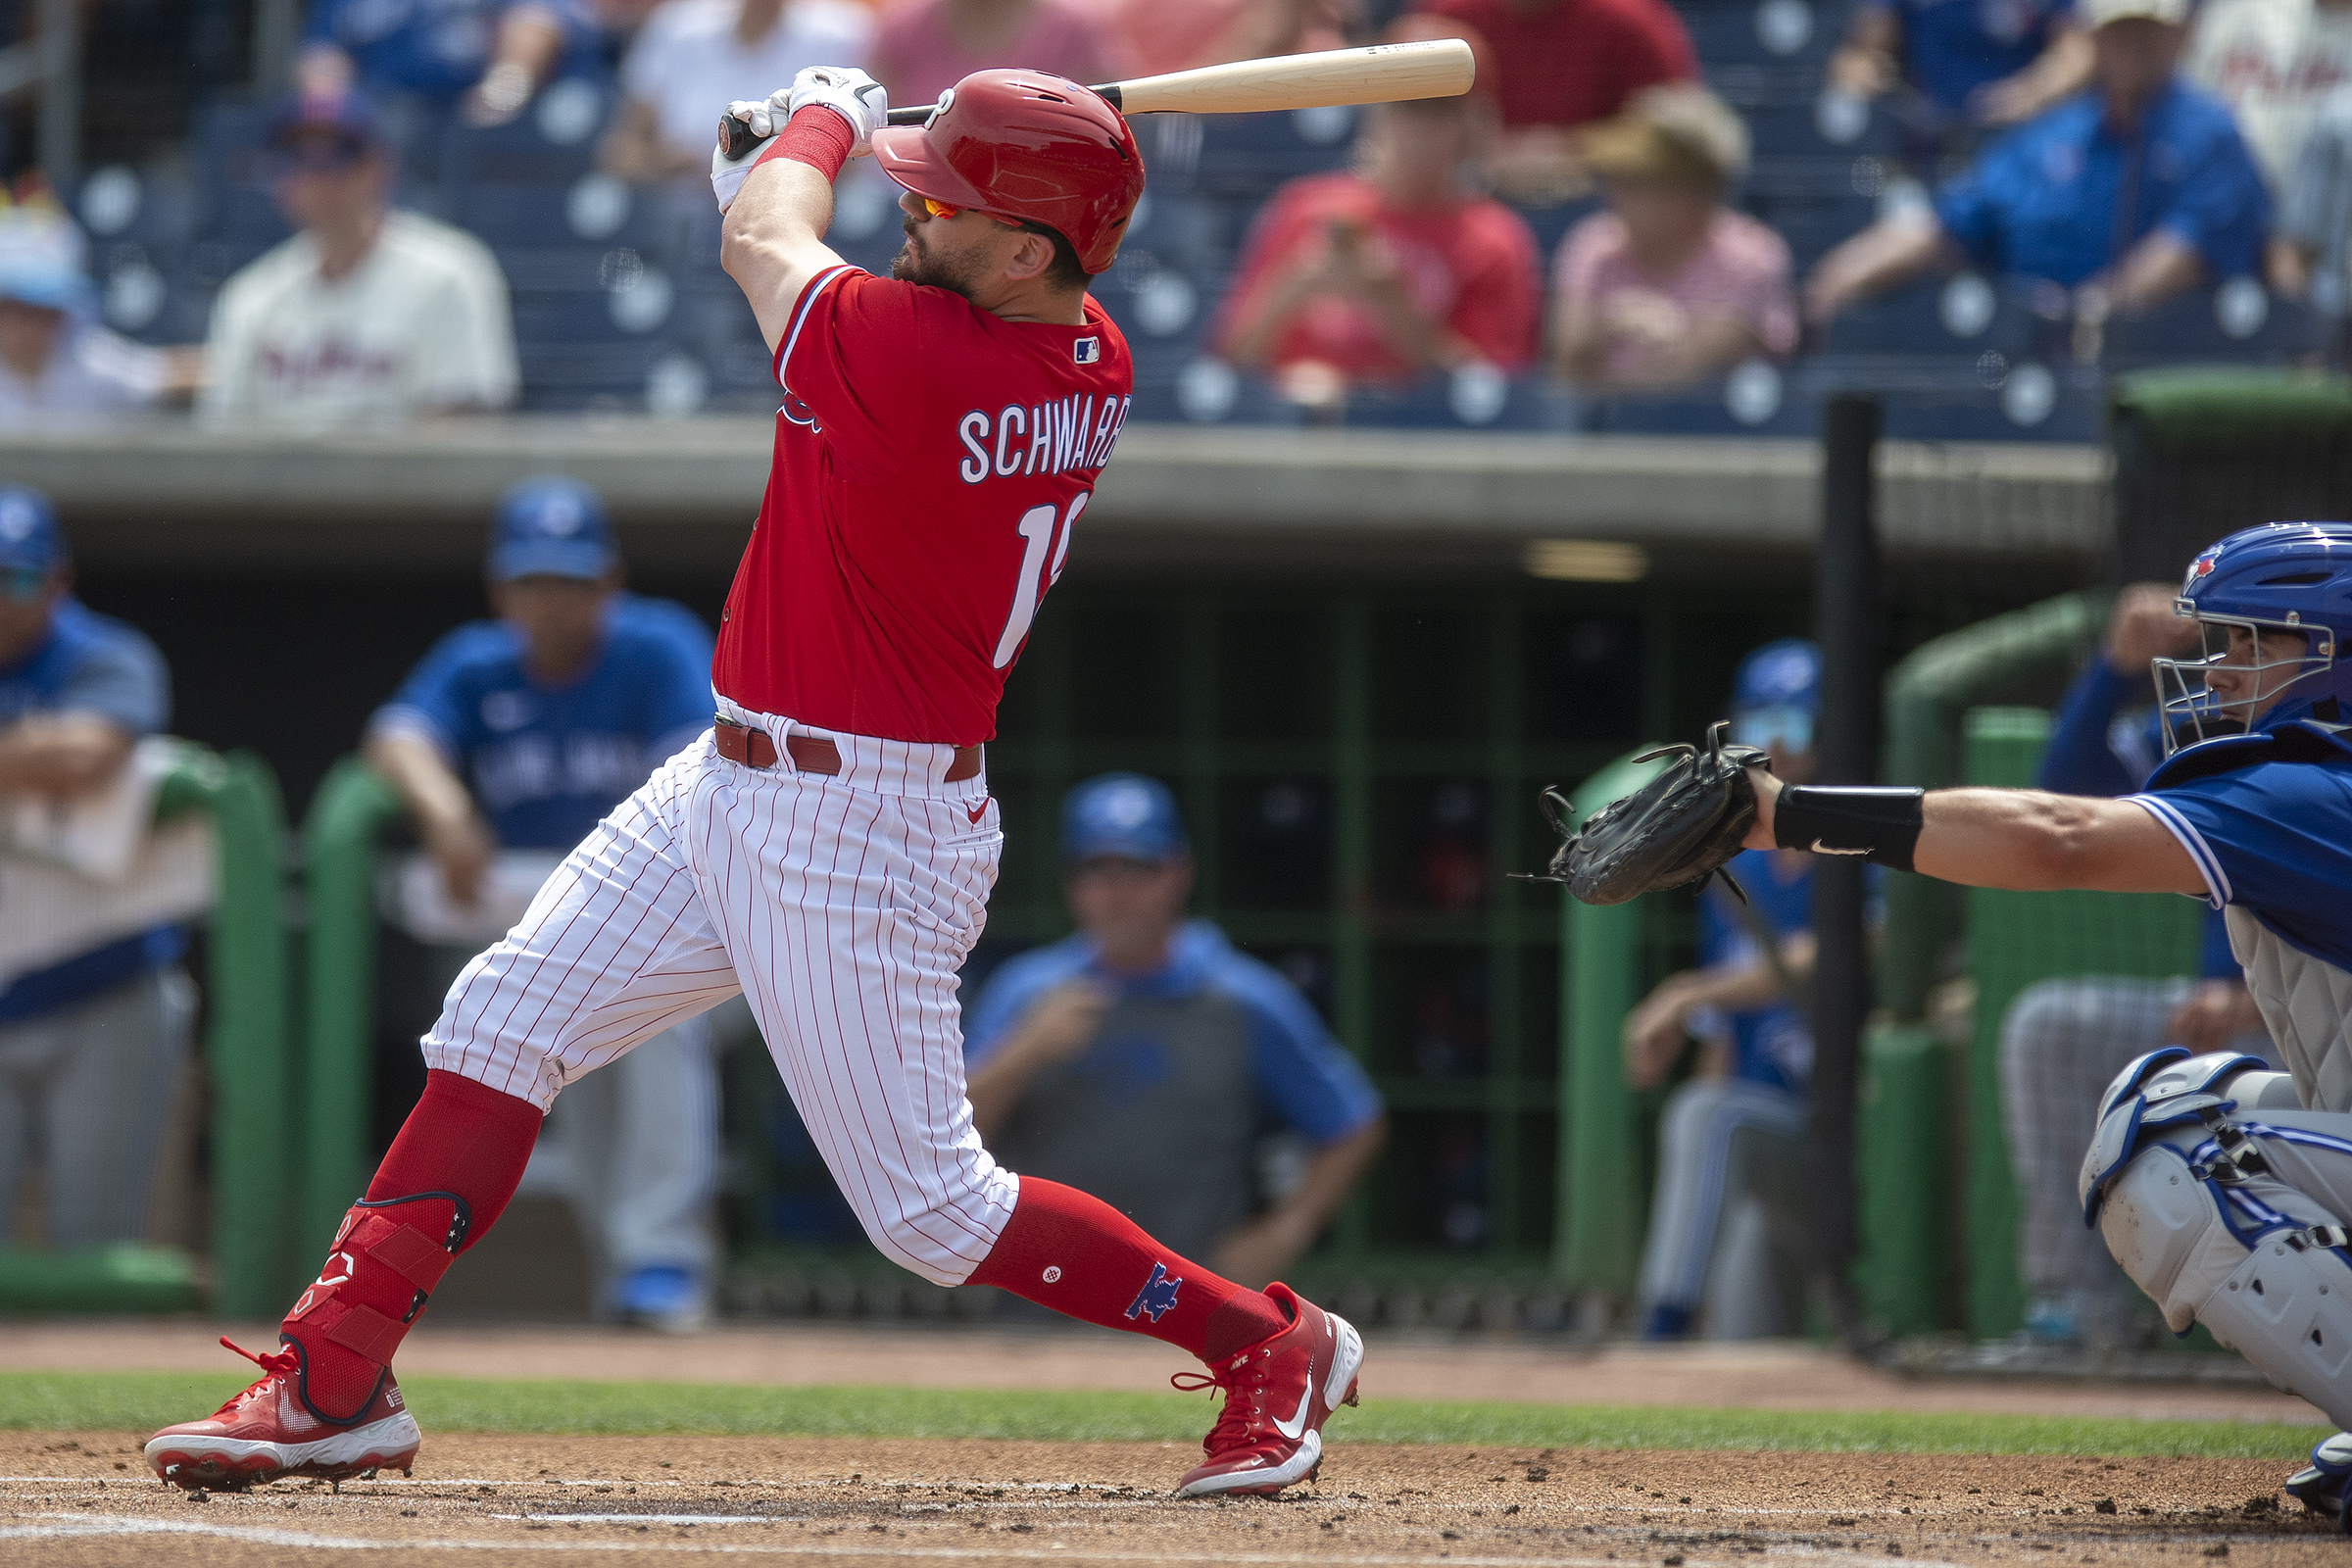 Kyle Schwarber, J.T. Realmuto win Silver Slugger Award  Phillies Nation -  Your source for Philadelphia Phillies news, opinion, history, rumors,  events, and other fun stuff.